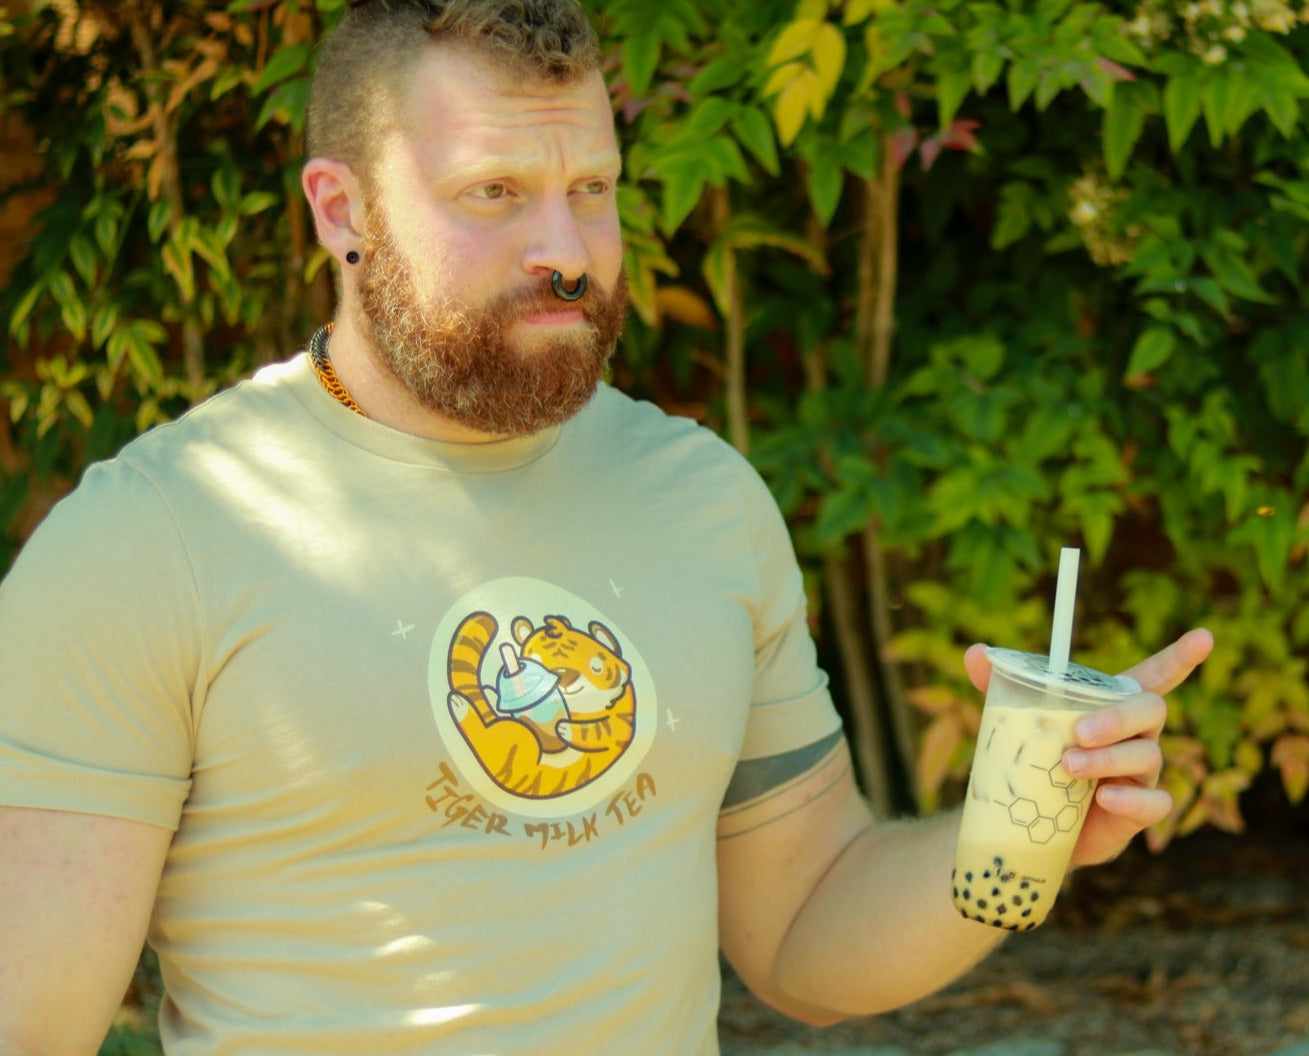 Muscular bearded ginger with earrings and nose holding bubble tea wearing tan t-shirt featuring image of tiger holding bubble tea, with the words tiger milk tea underneath.